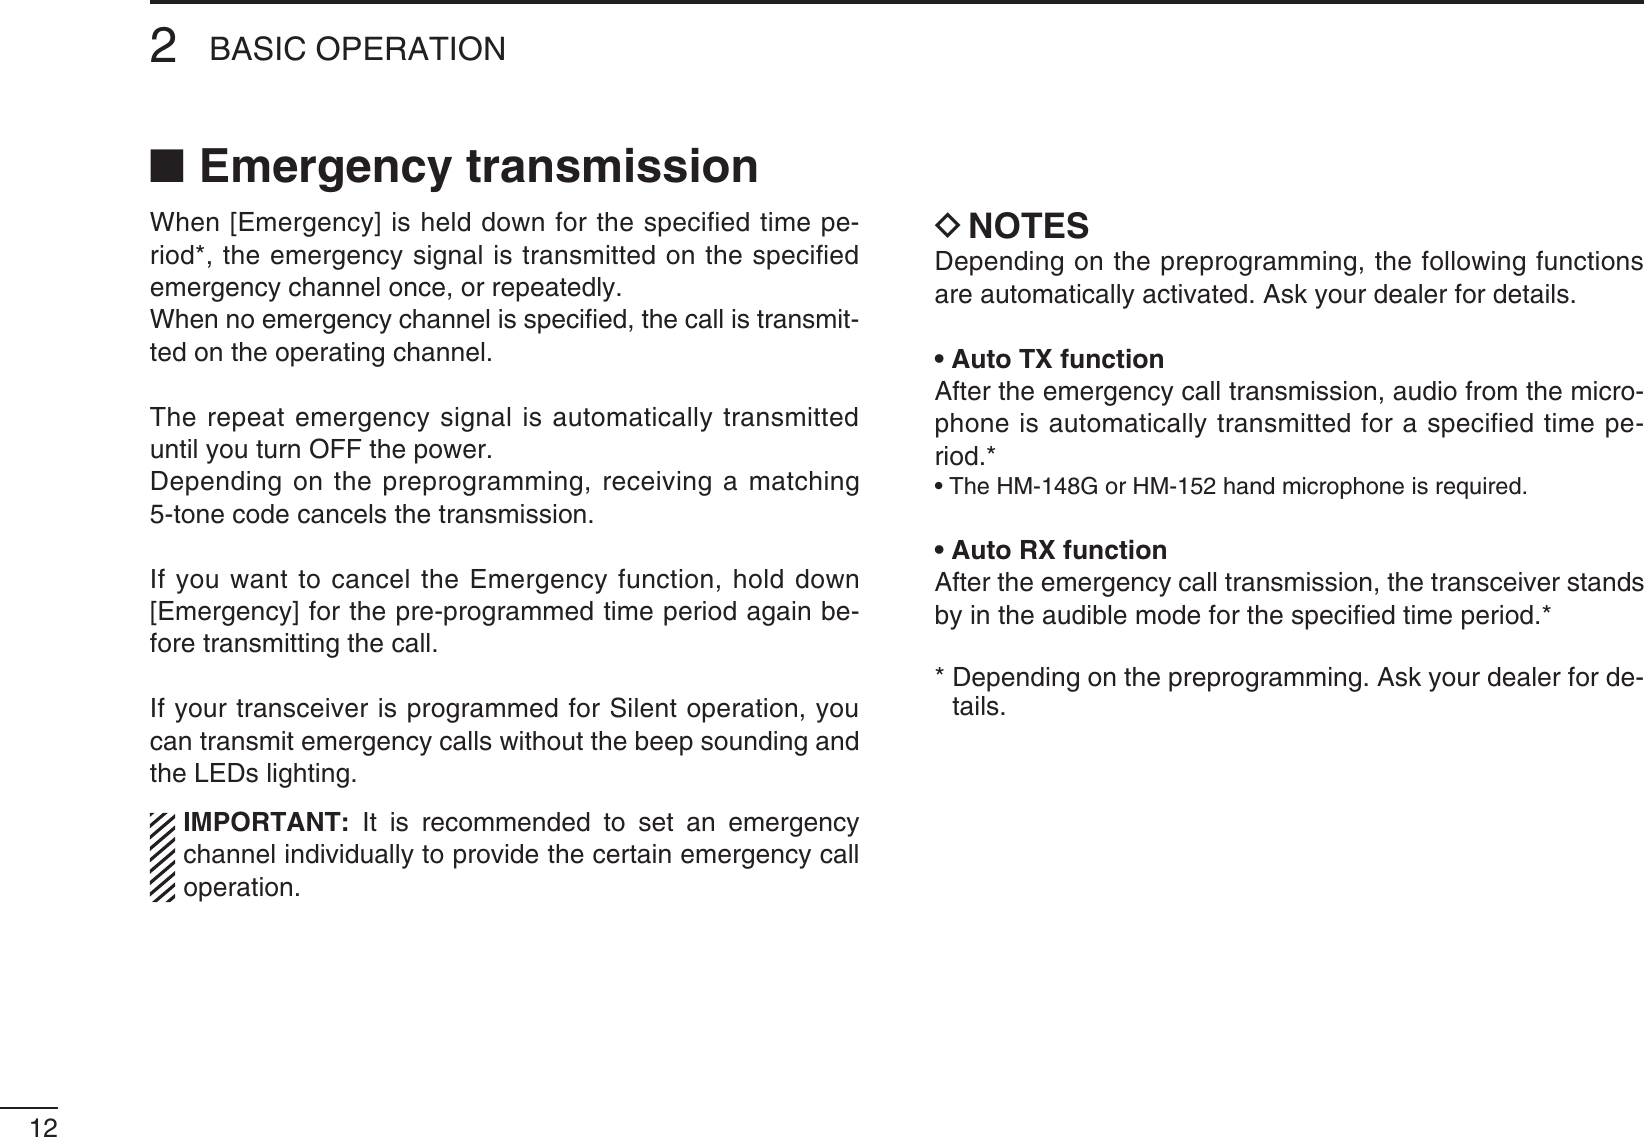 122BASIC OPERATIONN Emergency transmissionWhen [Emergency] is held down for the speciﬁed time pe-riod*, the emergency signal is transmitted on the speciﬁed emergency channel once, or repeatedly.When no emergency channel is speciﬁed, the call is transmit-ted on the operating channel.The repeat emergency signal is automatically transmitted until you turn OFF the power. Depending on the preprogramming, receiving a matching 5-tone code cancels the transmission.If you want to cancel the Emergency function, hold down [Emergency] for the pre-programmed time period again be-fore transmitting the call.If your transceiver is programmed for Silent operation, you can transmit emergency calls without the beep sounding and the LEDs lighting.)-0/24!.4 It is recommended to set an emergency channel individually to provide the certain emergency call operation.D NOTESDepending on the preprogramming, the following functions are automatically activated. Ask your dealer for details.s!UTO48FUNCTIONAfter the emergency call transmission, audio from the micro-phone is automatically transmitted for a speciﬁed time pe-riod.*s4HE(-&apos;OR(-HANDMICROPHONEISREQUIREDs!UTO28FUNCTIONAfter the emergency call transmission, the transceiver stands by in the audible mode for the speciﬁed time period.**  Depending on the preprogramming. Ask your dealer for de-tails.